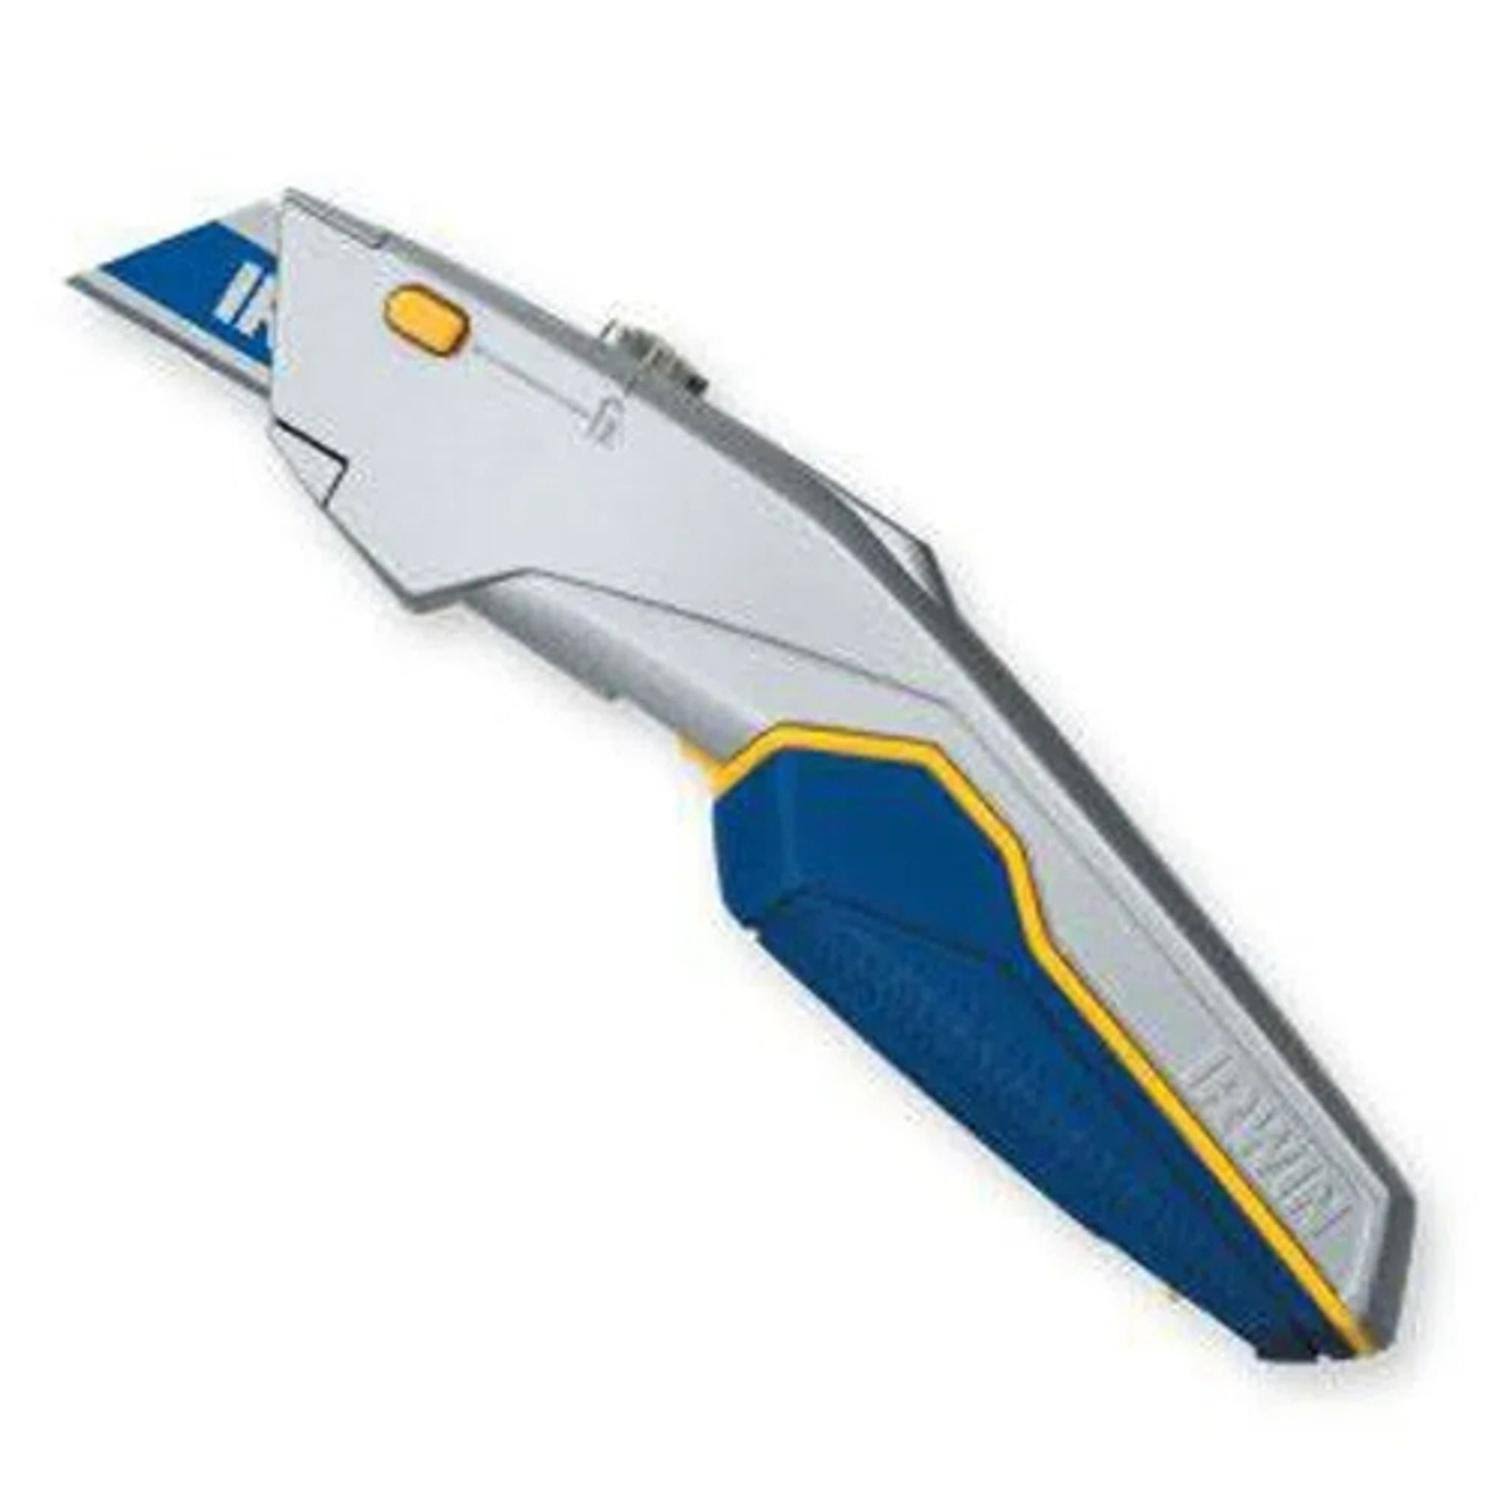 Irwin Tools ProTouch Utility Knife - Retractable